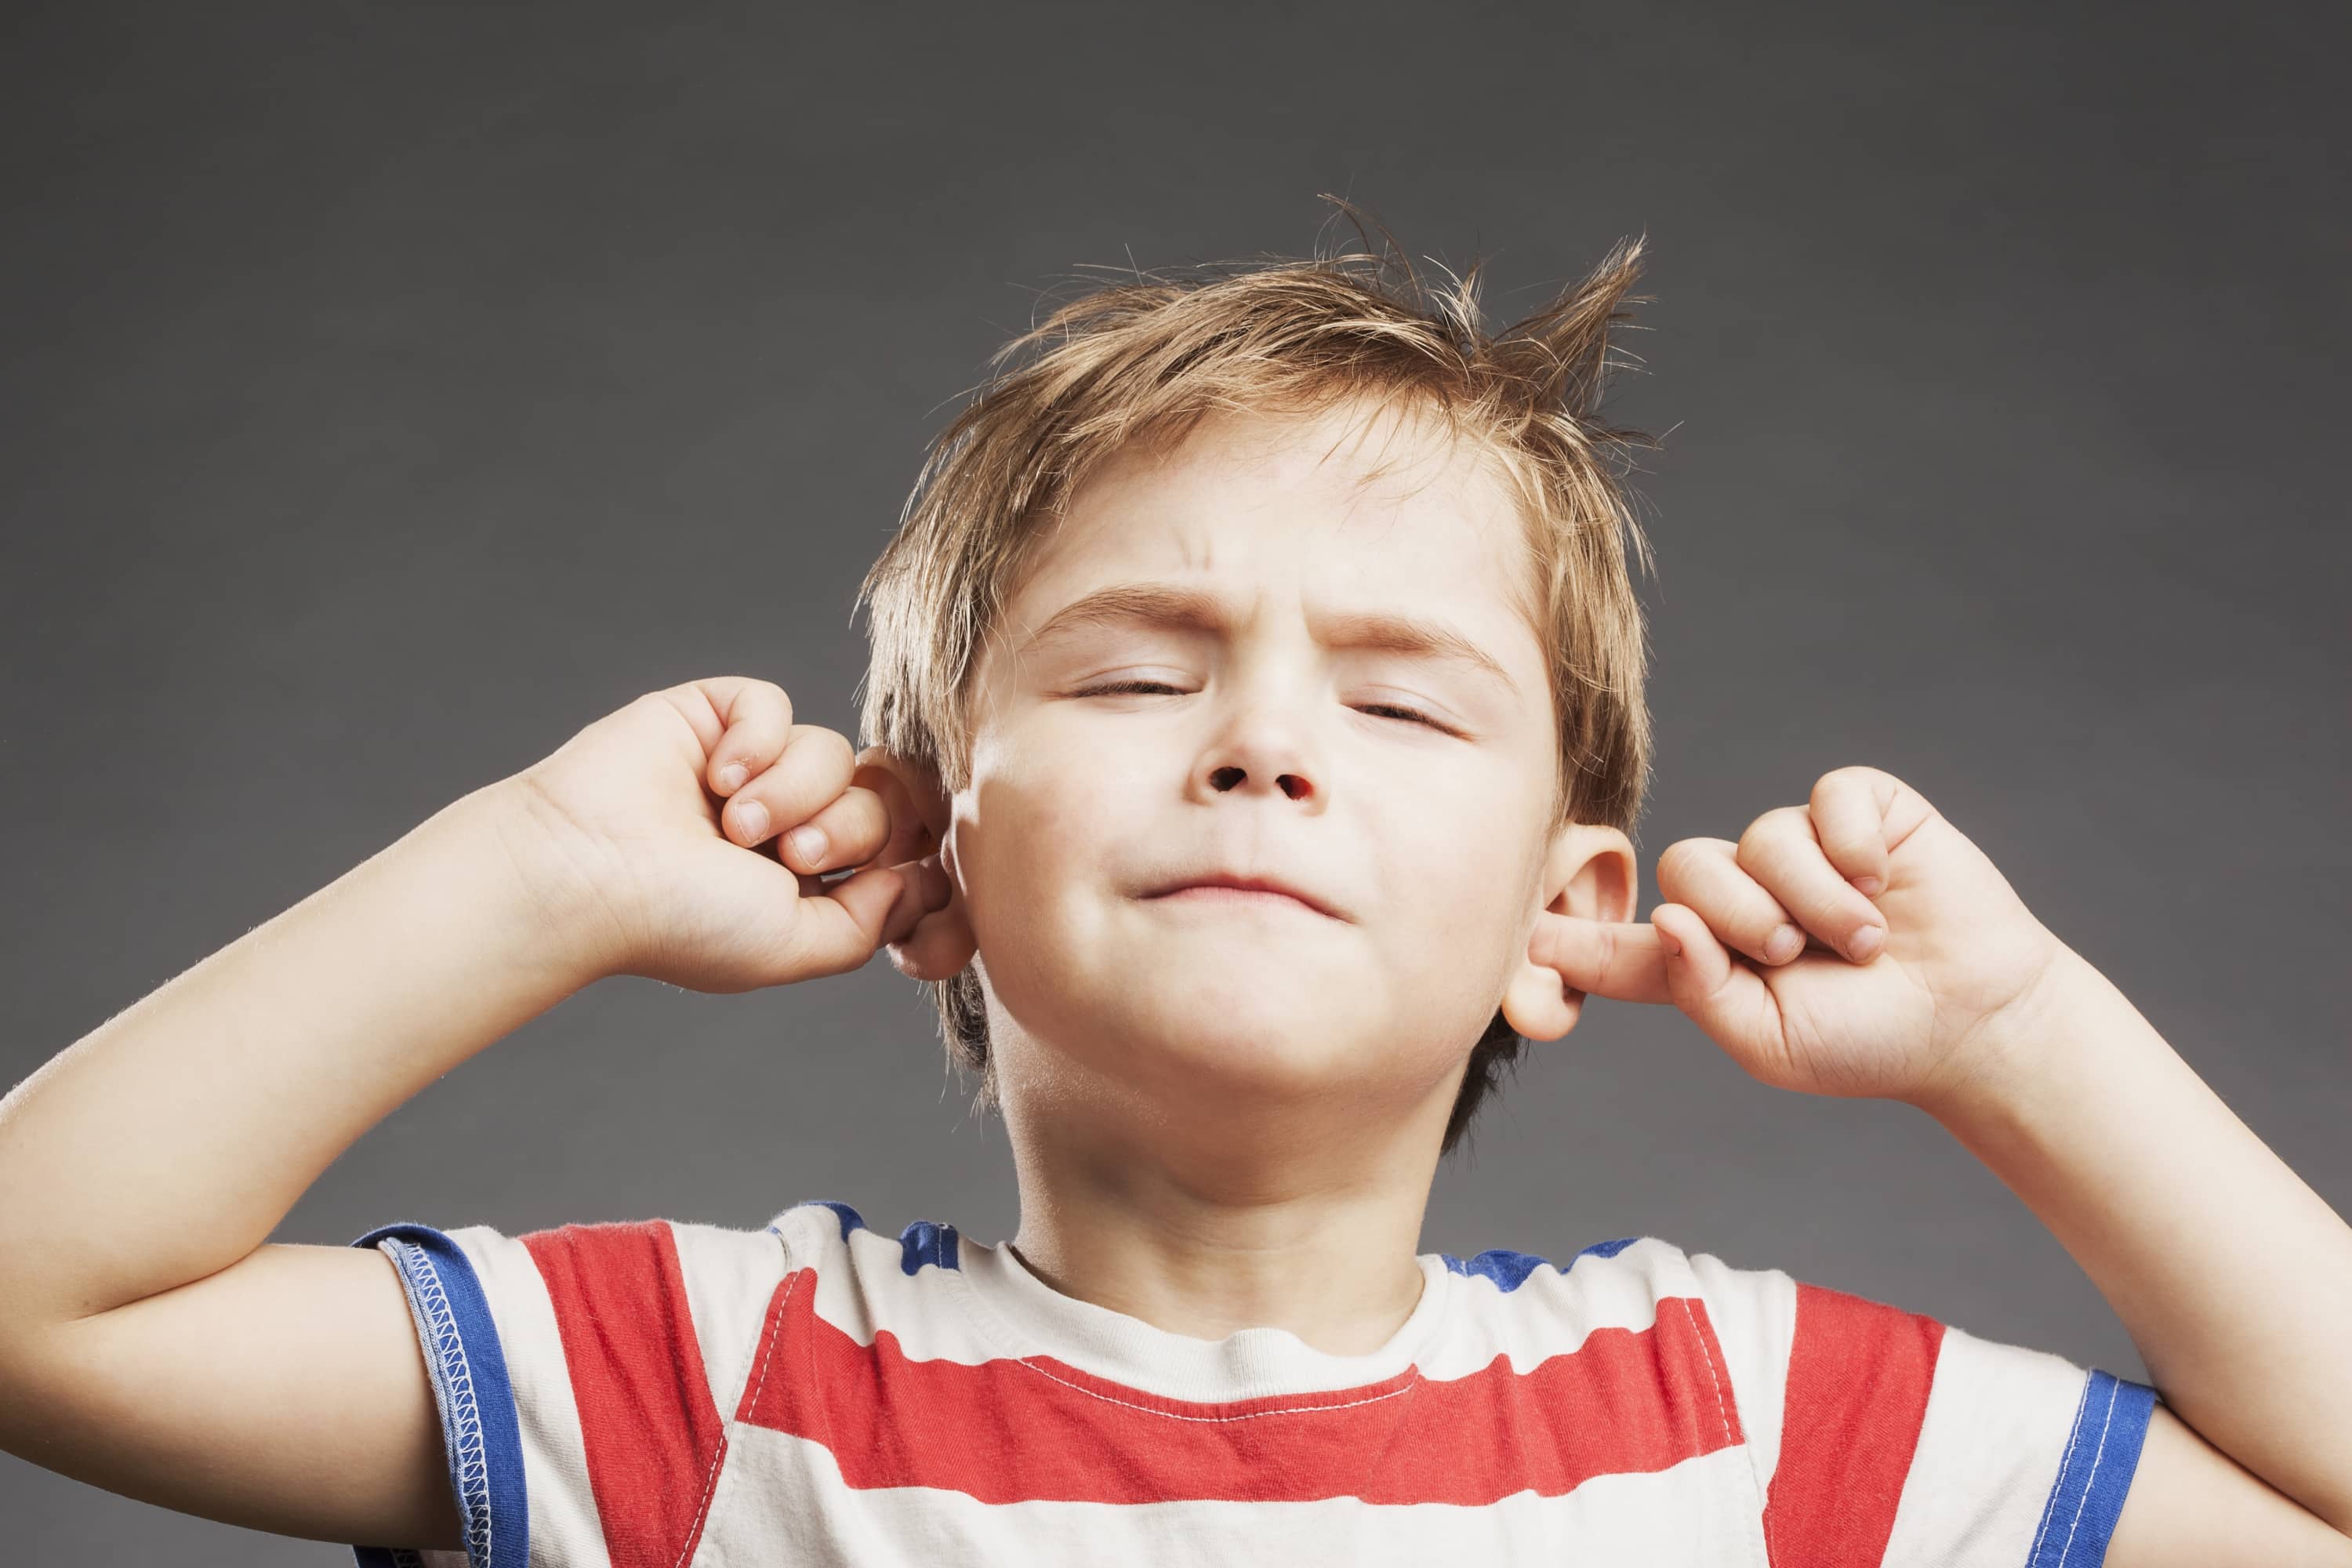 The Surprising Strategy That Will Get Your Kids to Listen Better